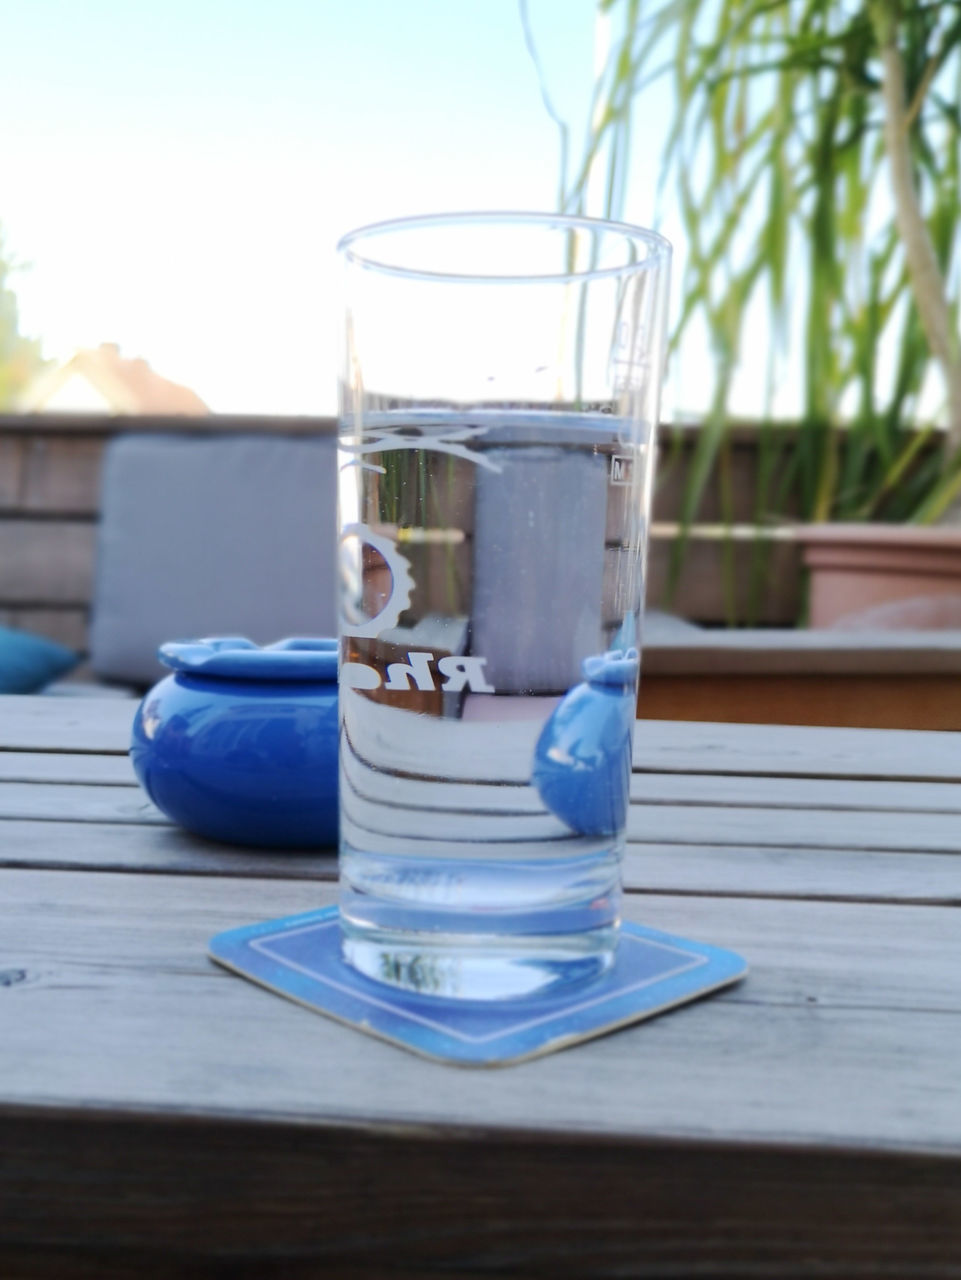 CLOSE-UP OF GLASS OF WATER ON TABLE